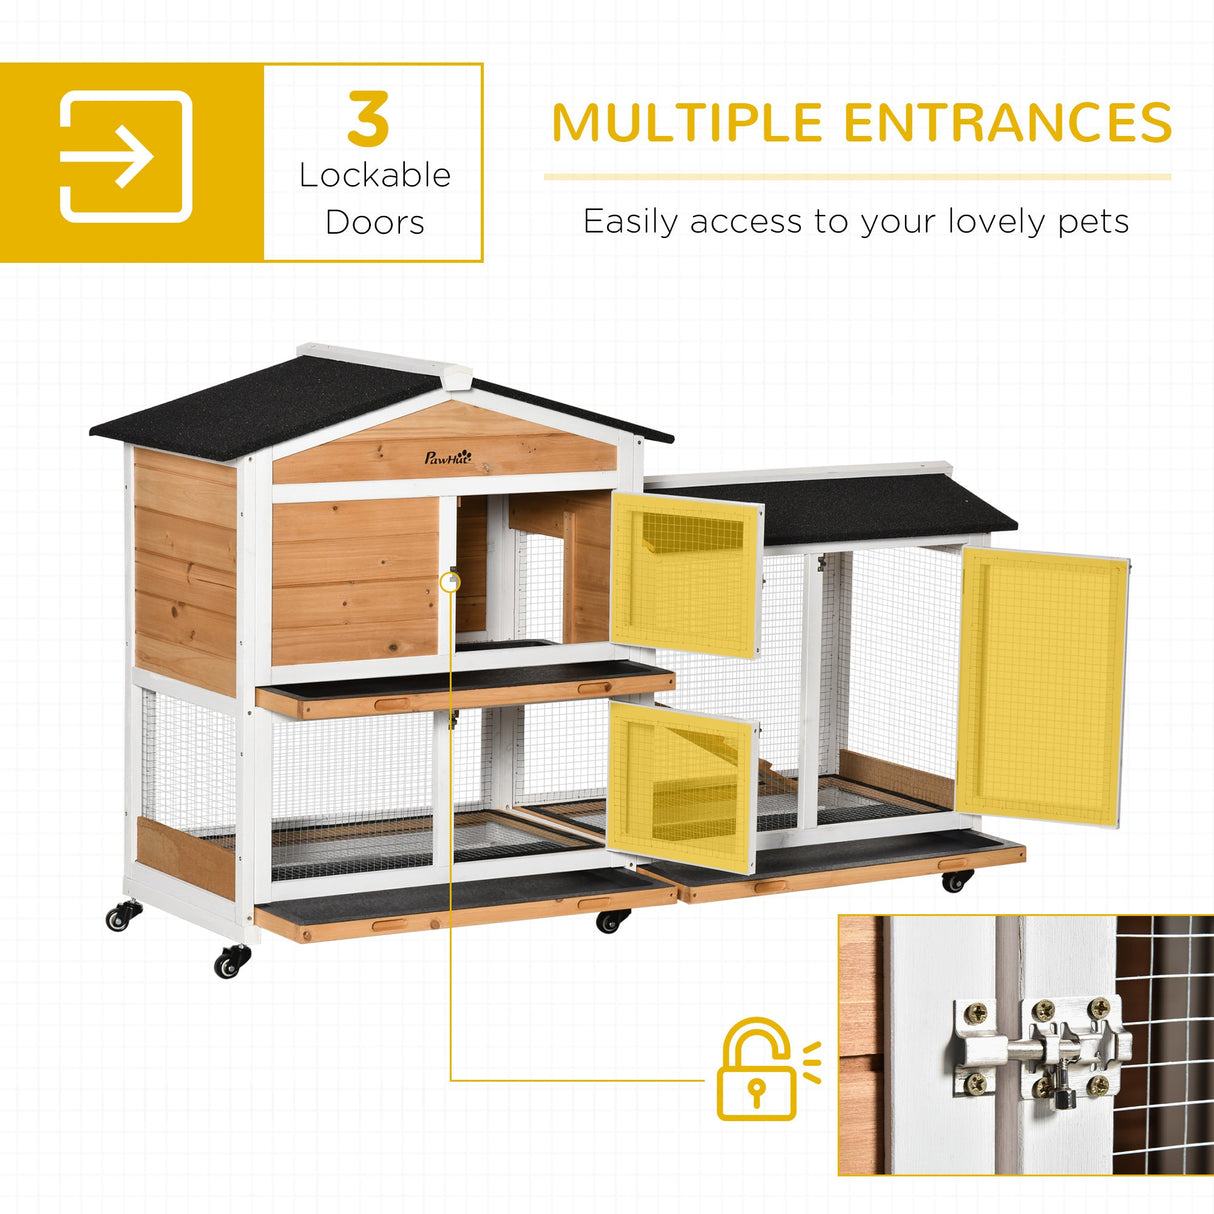 Two-Tier Rabbit Hutch Outdoor and Run Wooden Mobile Guinea Pig Hutch Bunny Cage w/ Wheels, Run, Slide-Out Tray, Ramp 157.4 x 53 x 99.5 cm - Yellow, PawHut, Yellow/White